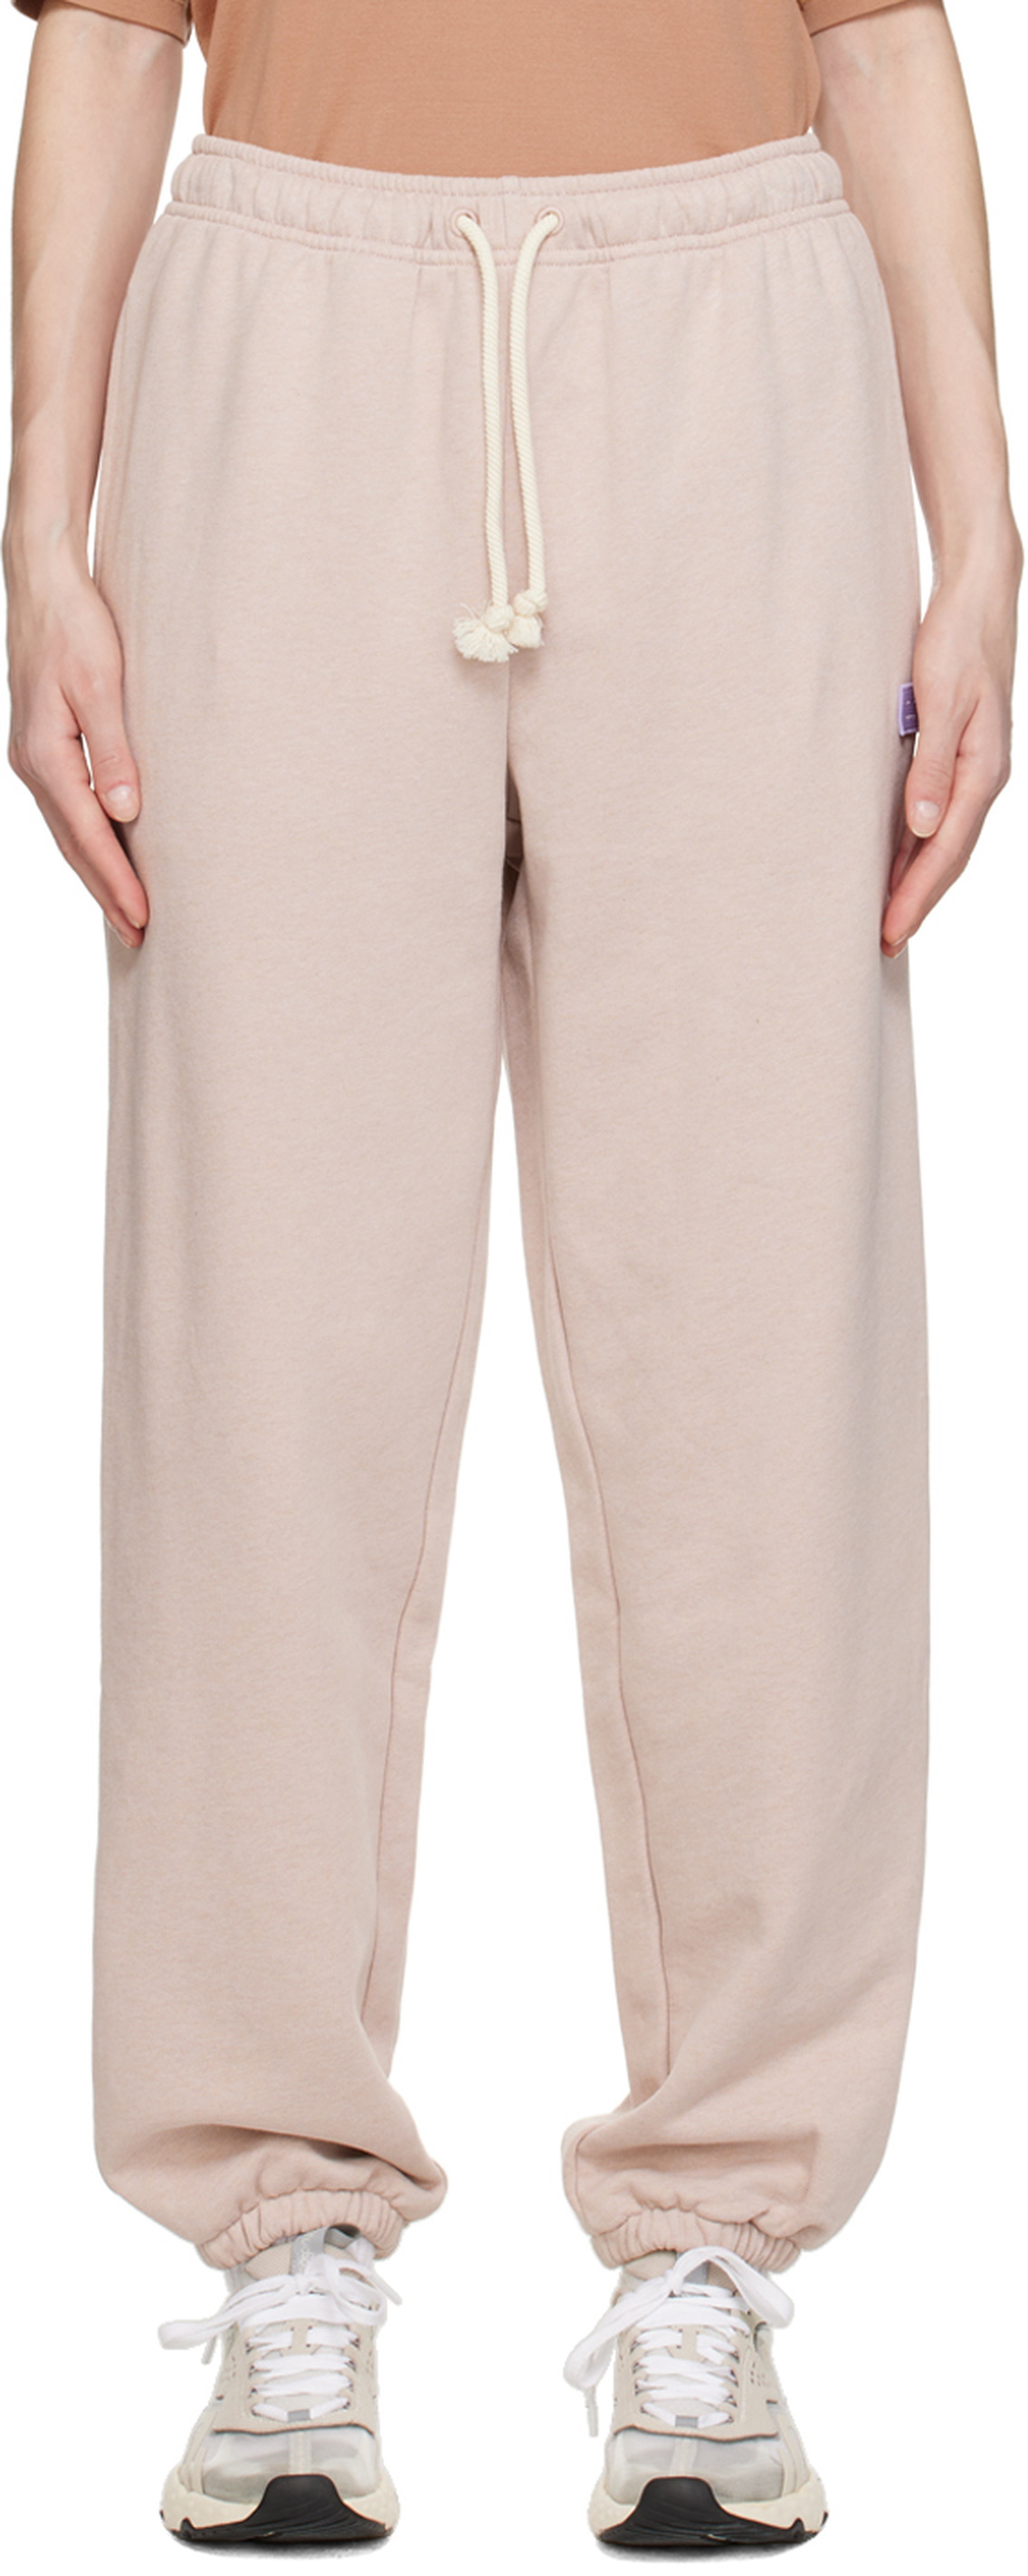 Acne Studios Pink Relaxed-Fit Lounge Pants Acne Studios